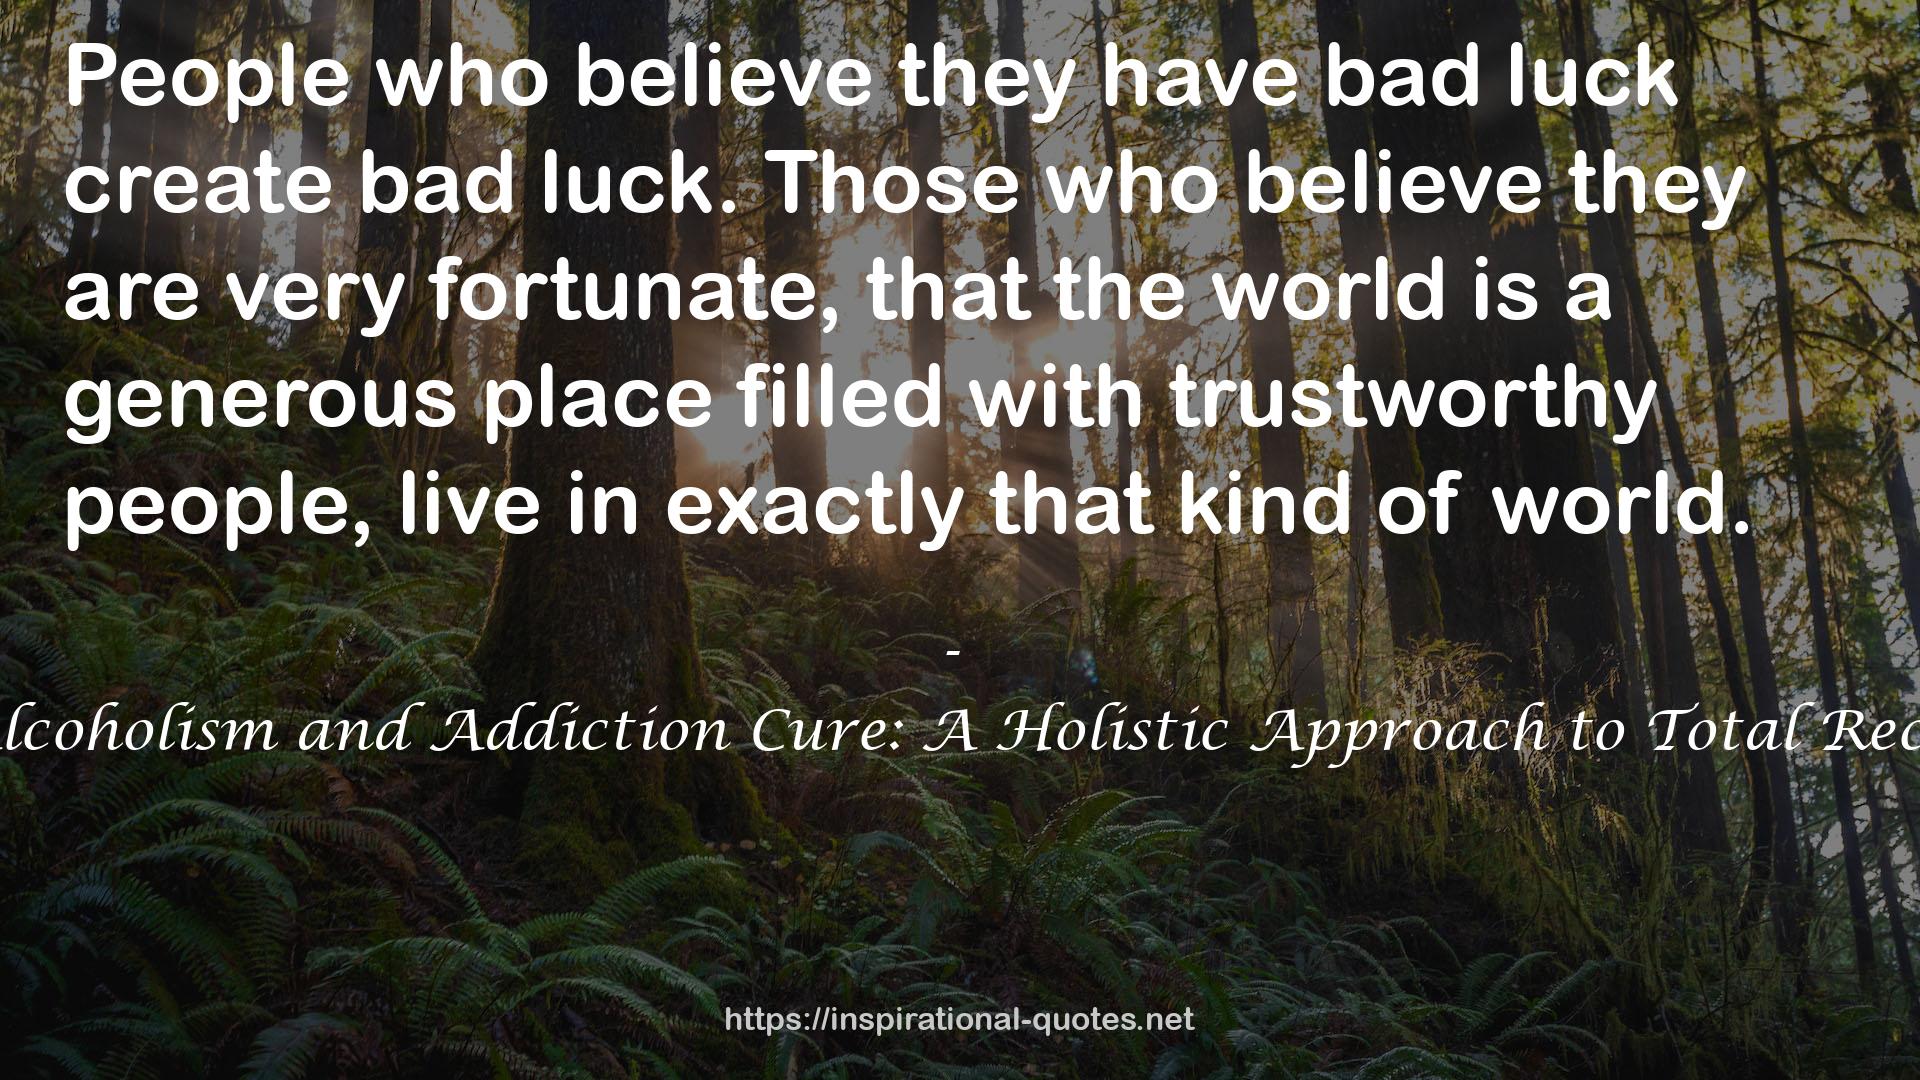 The Alcoholism and Addiction Cure: A Holistic Approach to Total Recovery QUOTES